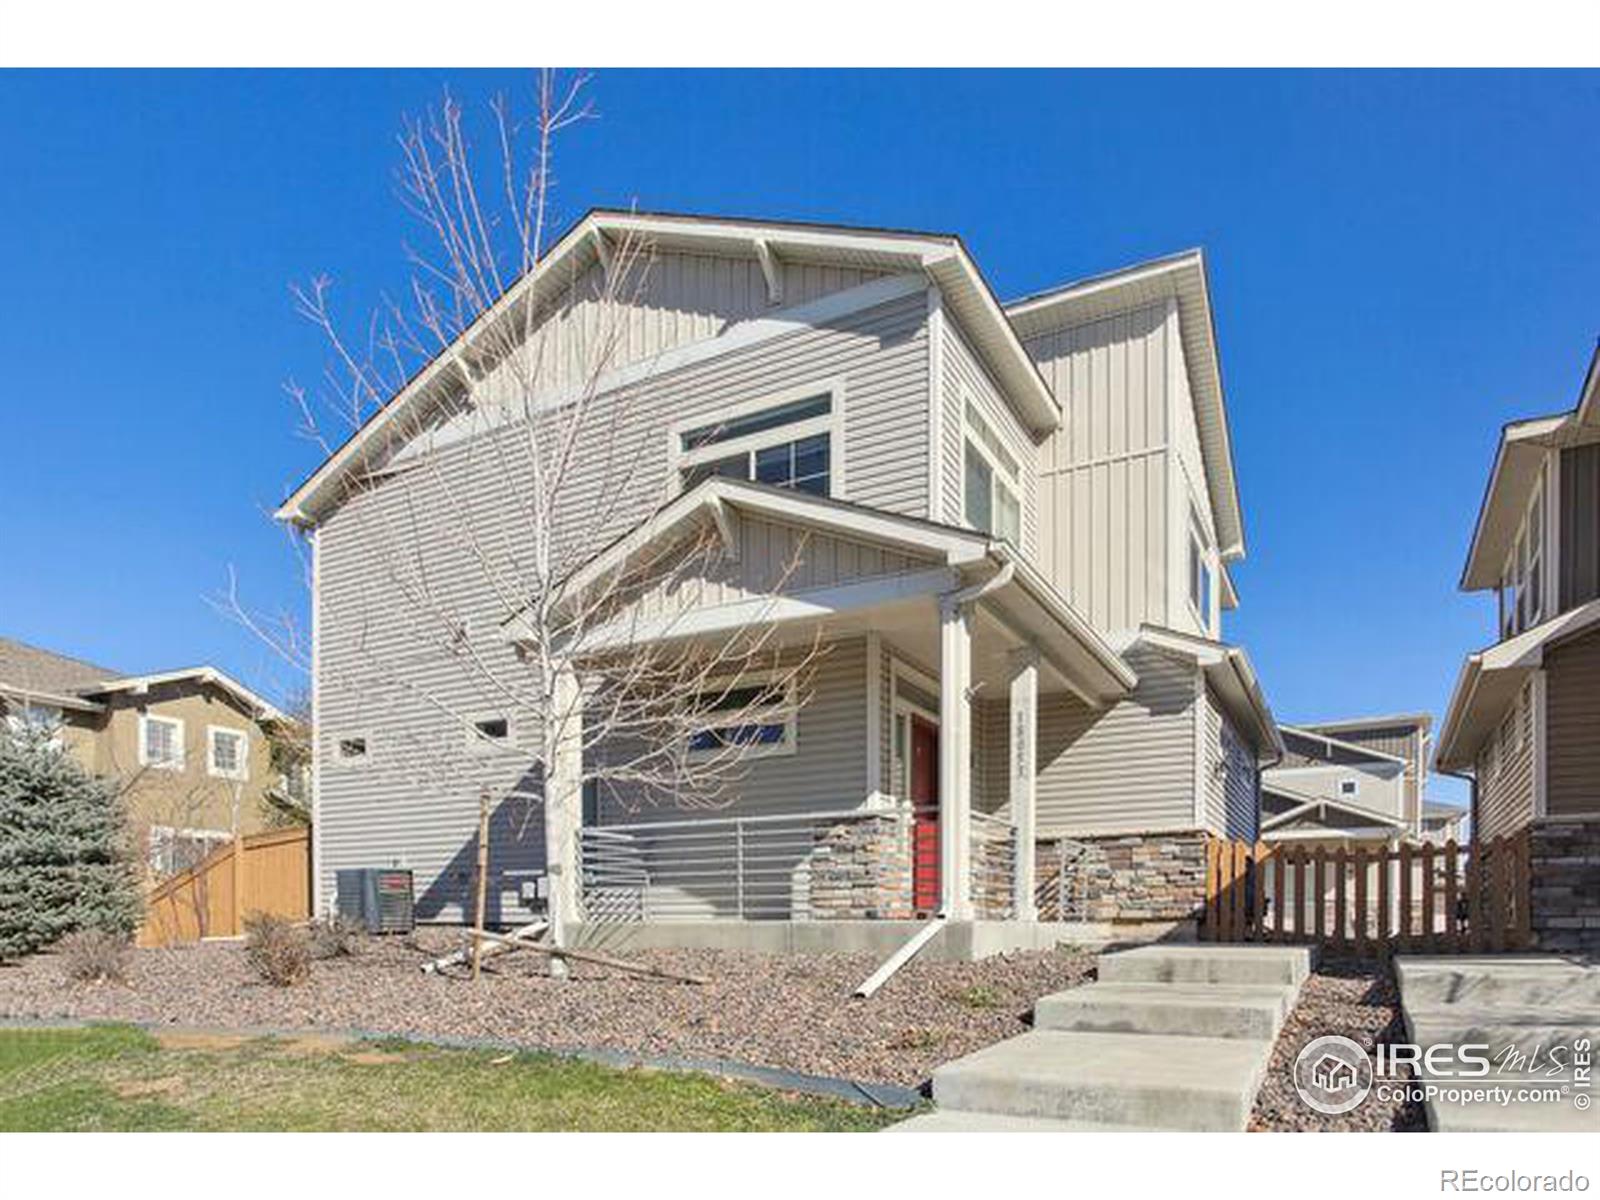 18053 E 104th Place, commerce city MLS: 4567891006111 Beds: 3 Baths: 3 Price: $460,000